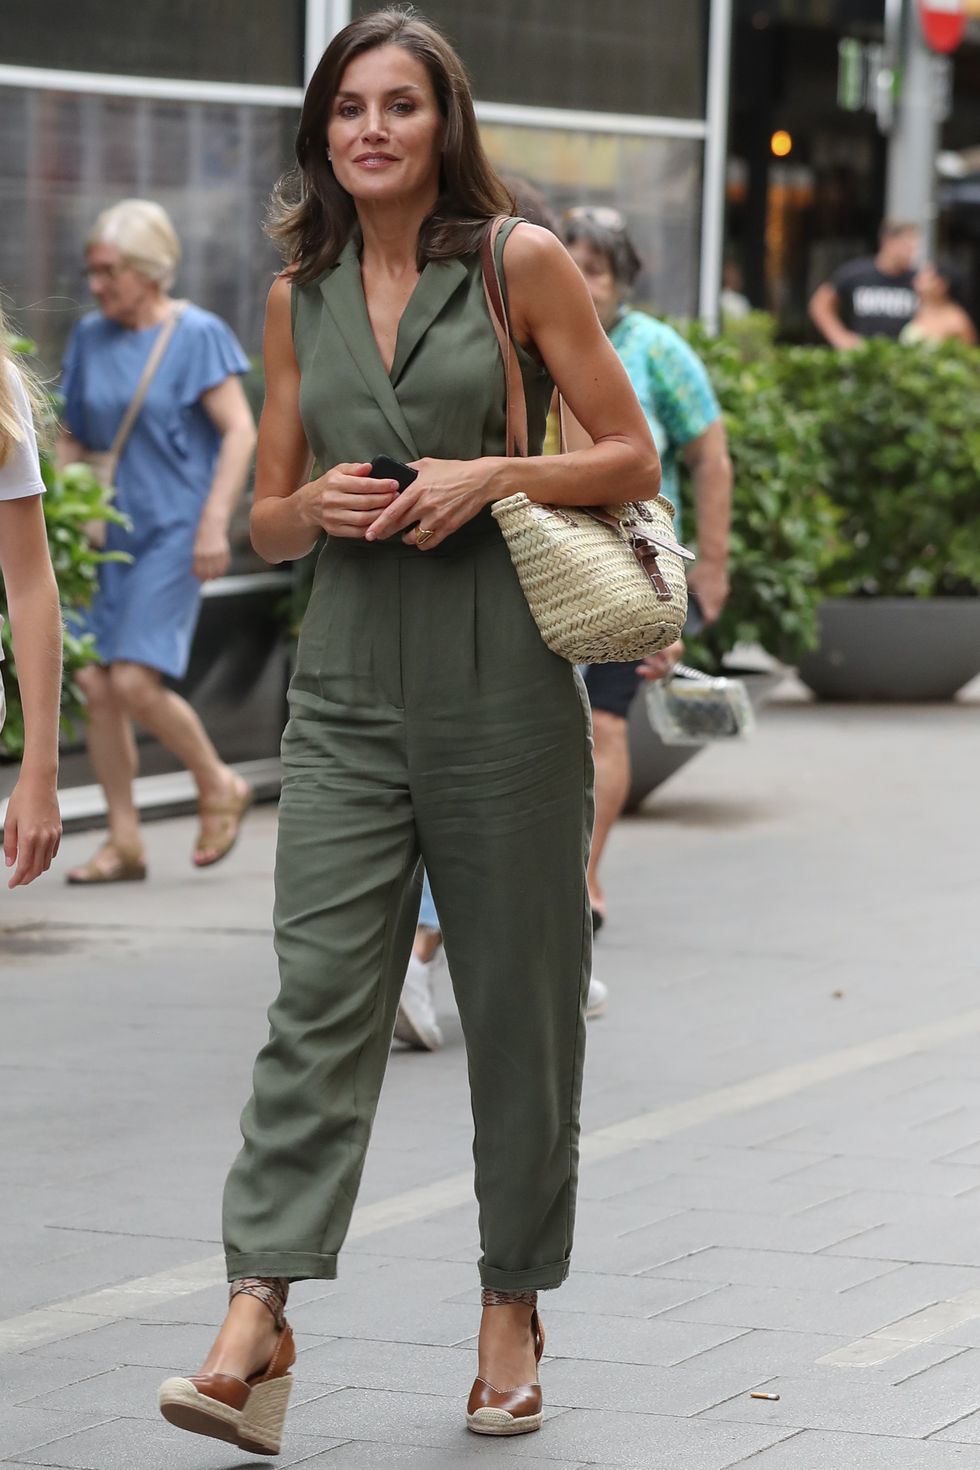 Spanish Royals Family Sighting In Mallorca- August 1, 2019